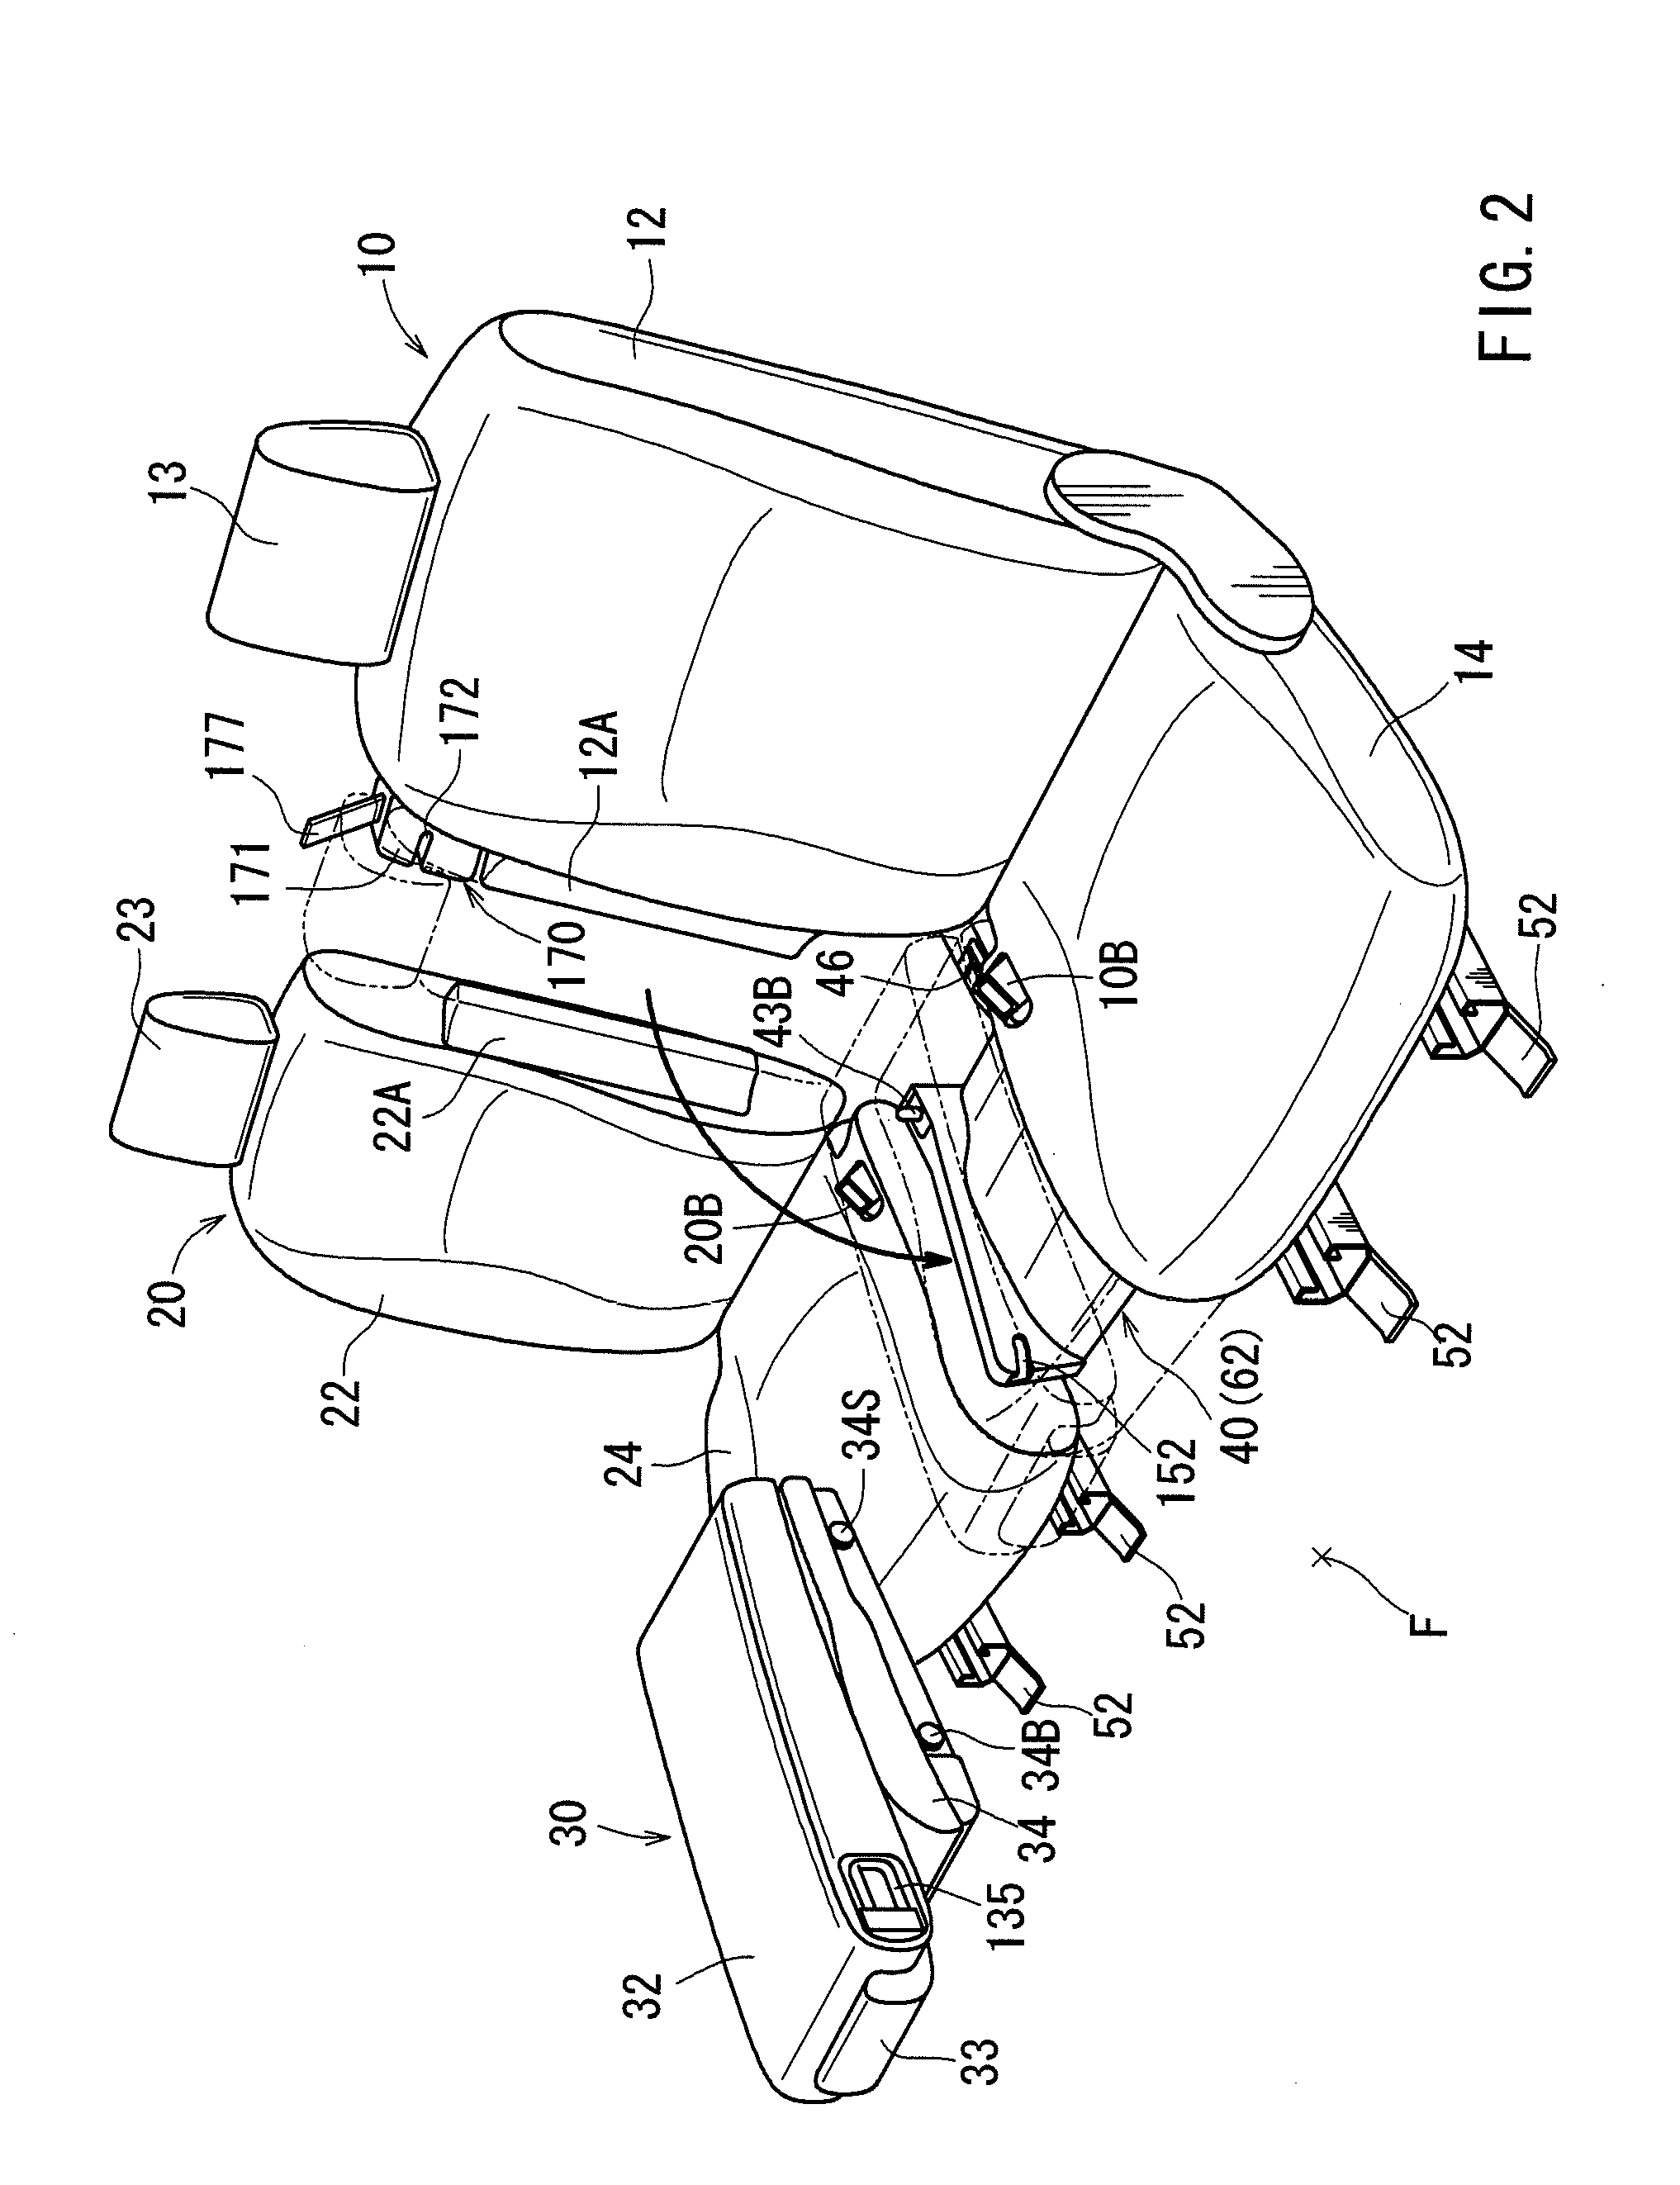 Structure for storing seat for automobile